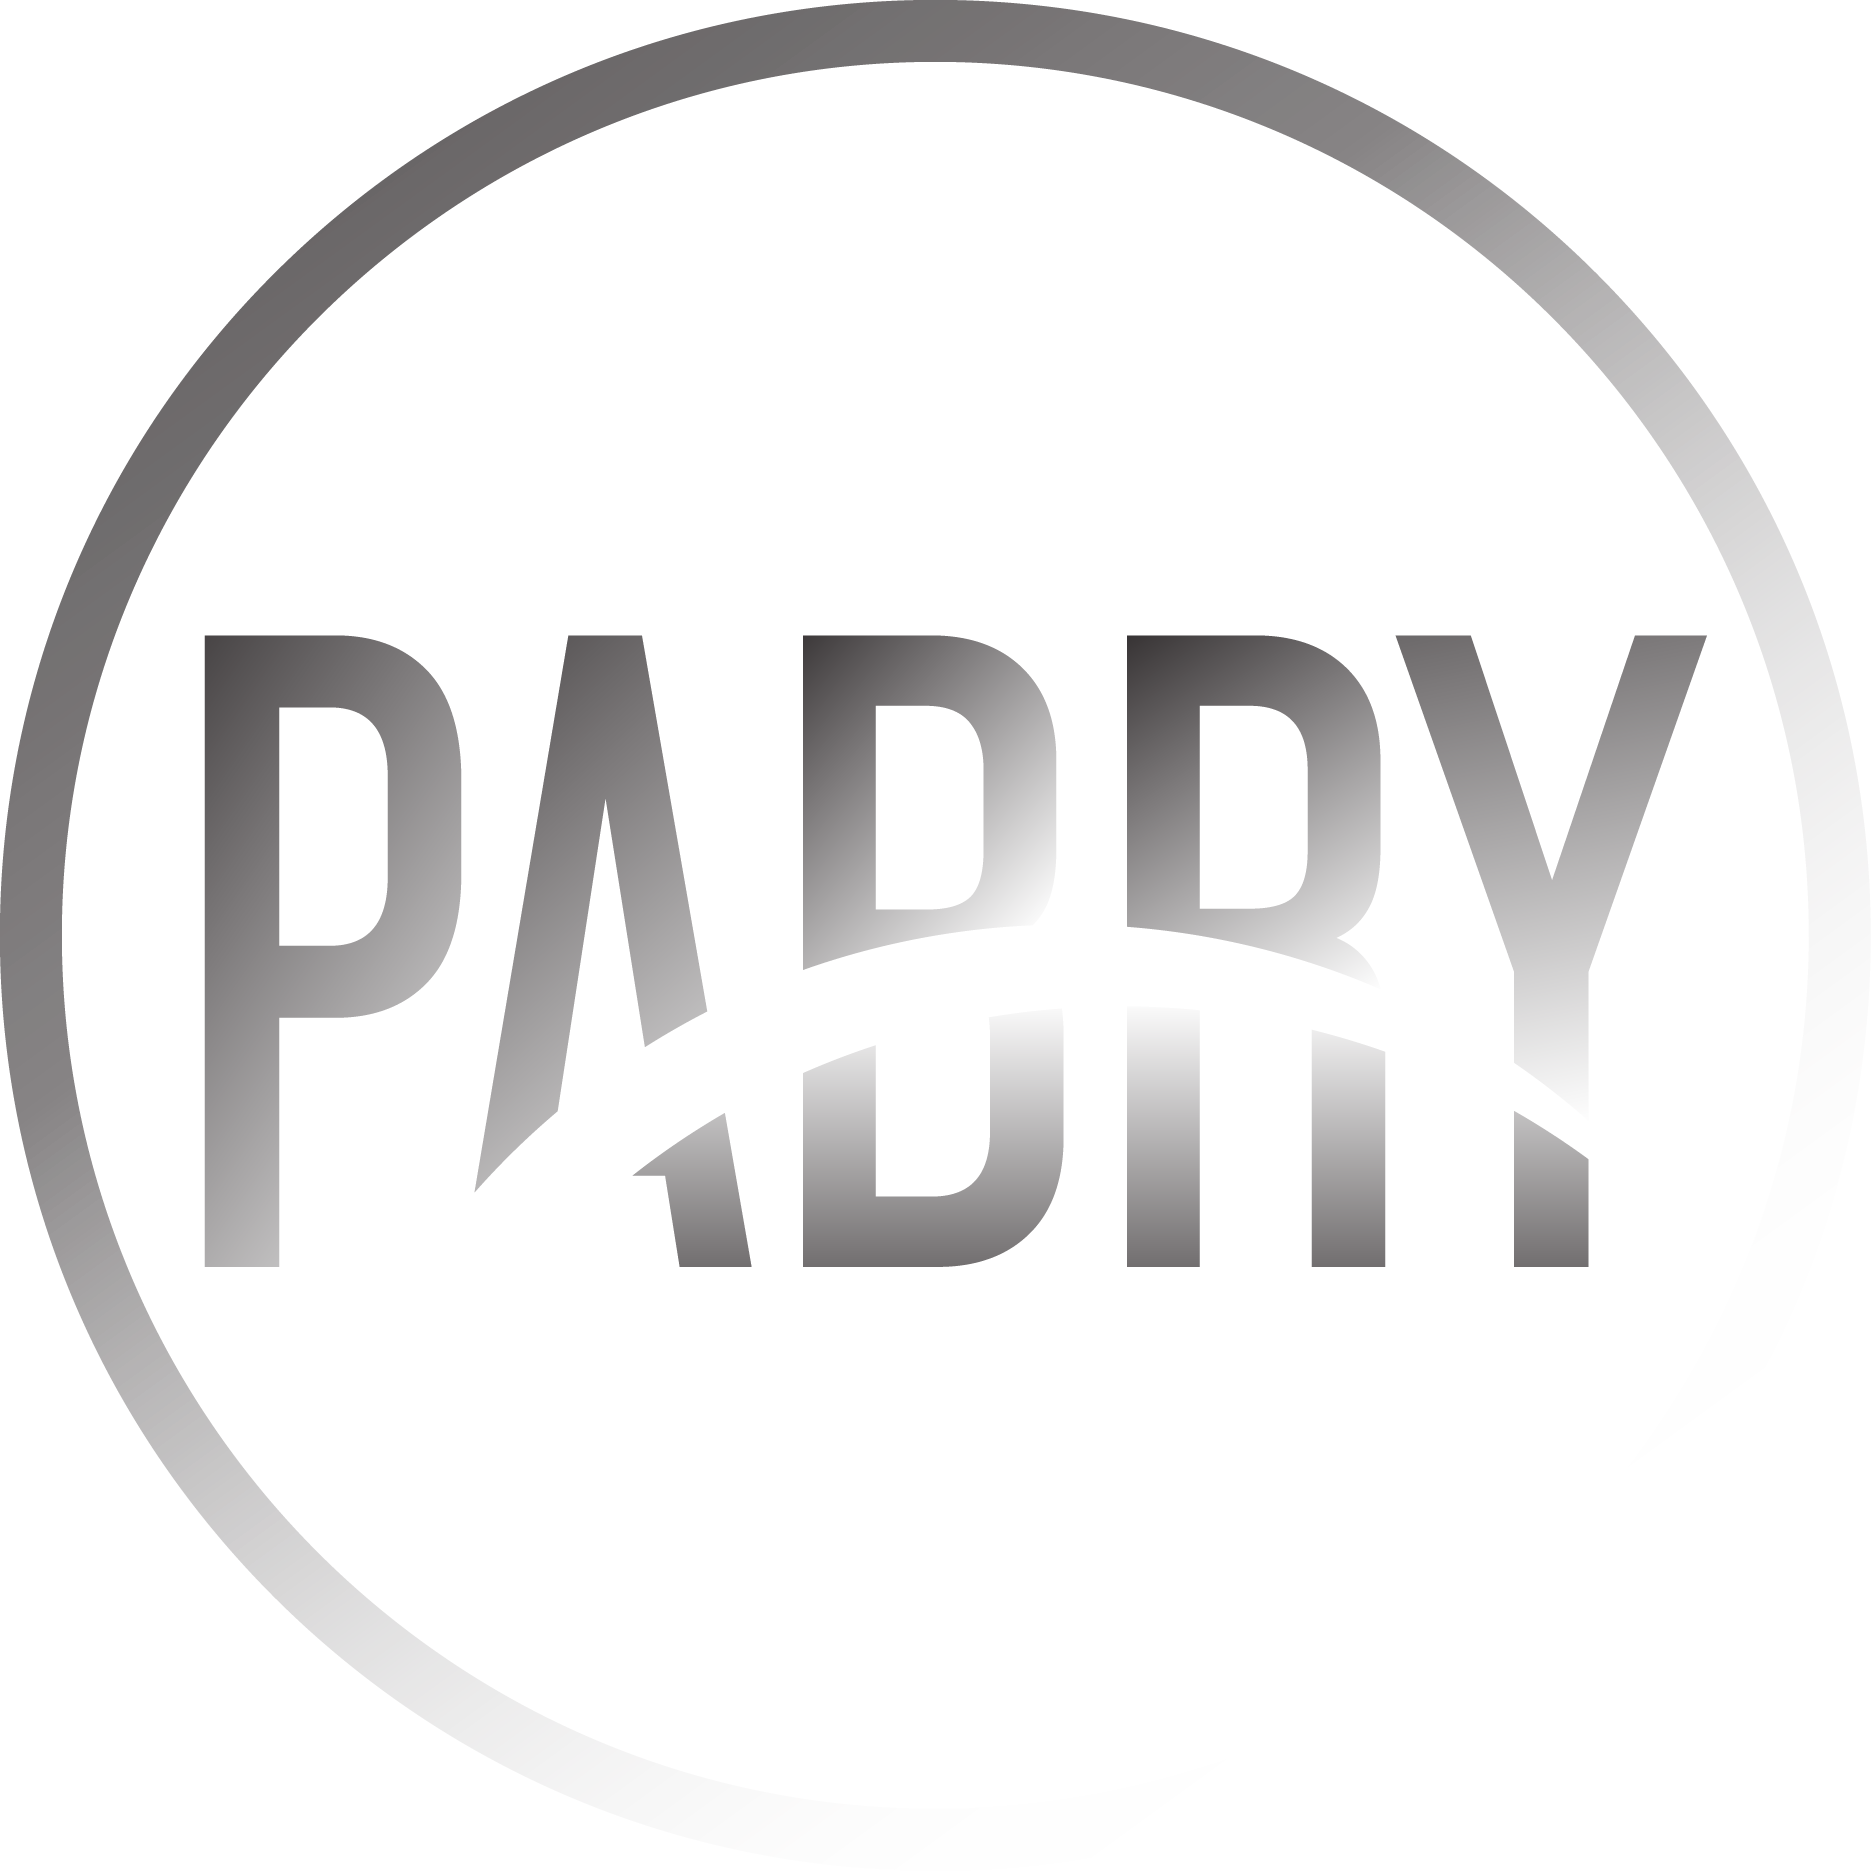 pabry.com is for sale